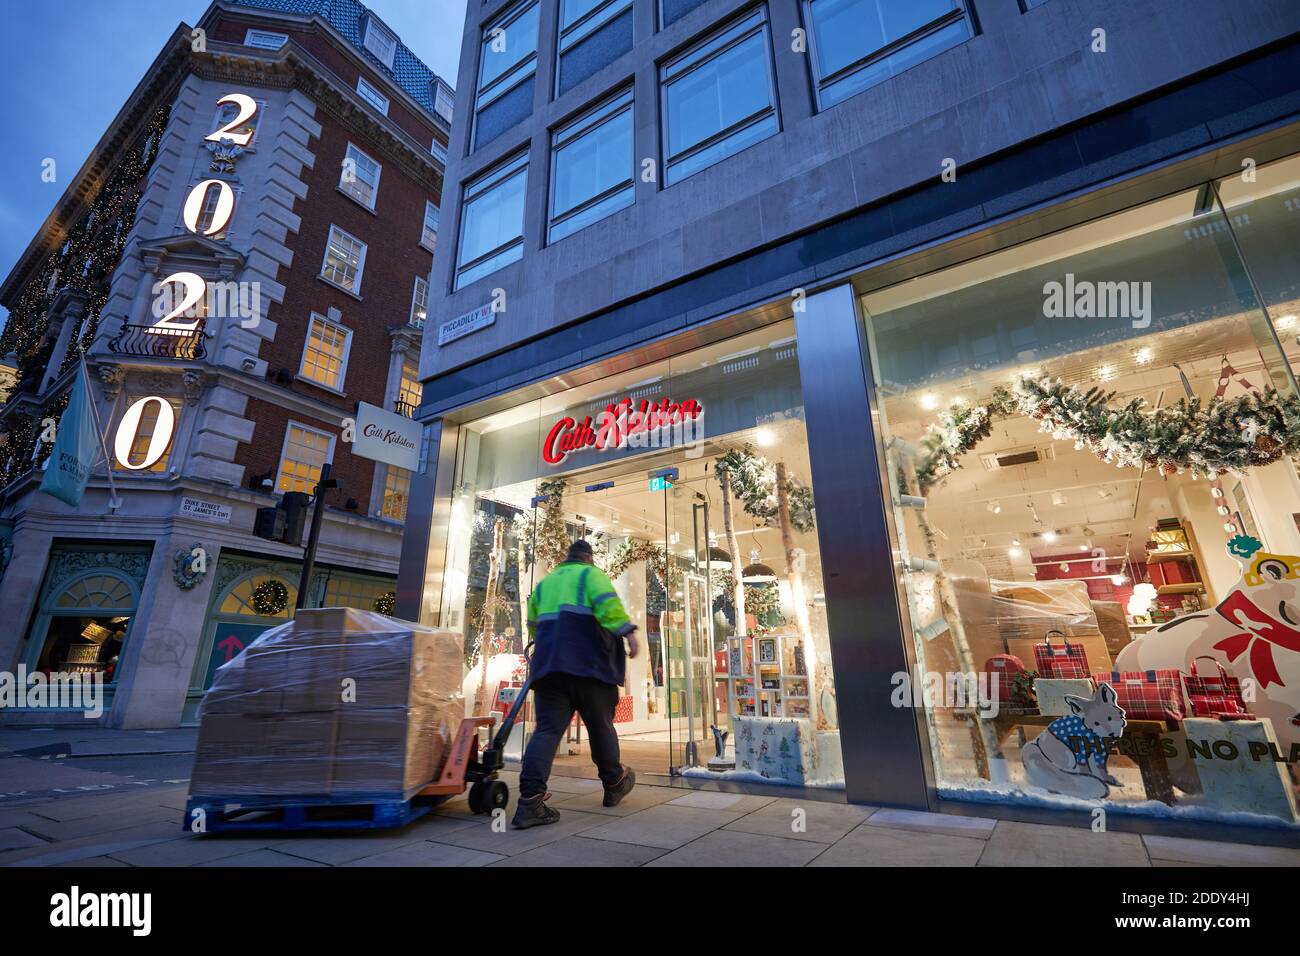 London, UK. - 26 Nov 2020: Stock is brought into the Cath Kidston store on Piccadilly in preparation for reopening after lockdown. The shop is only UK outlet salvaged after the chain went into administratio during the early stages of the coronavirus pandemic. Stock Photo